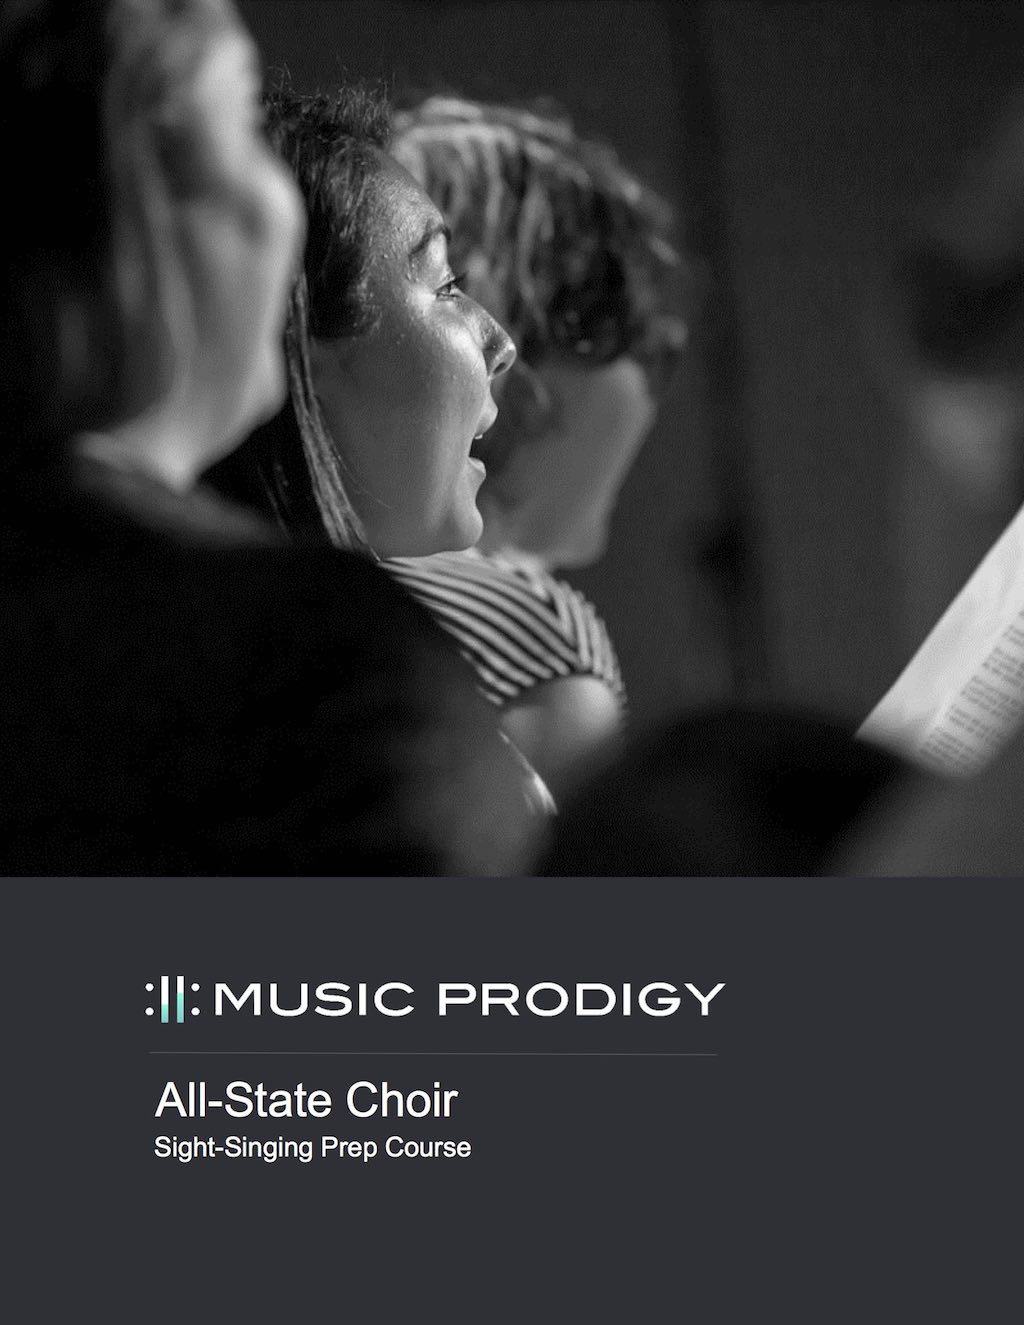 Music Prodigy All-State Choir Prep Course